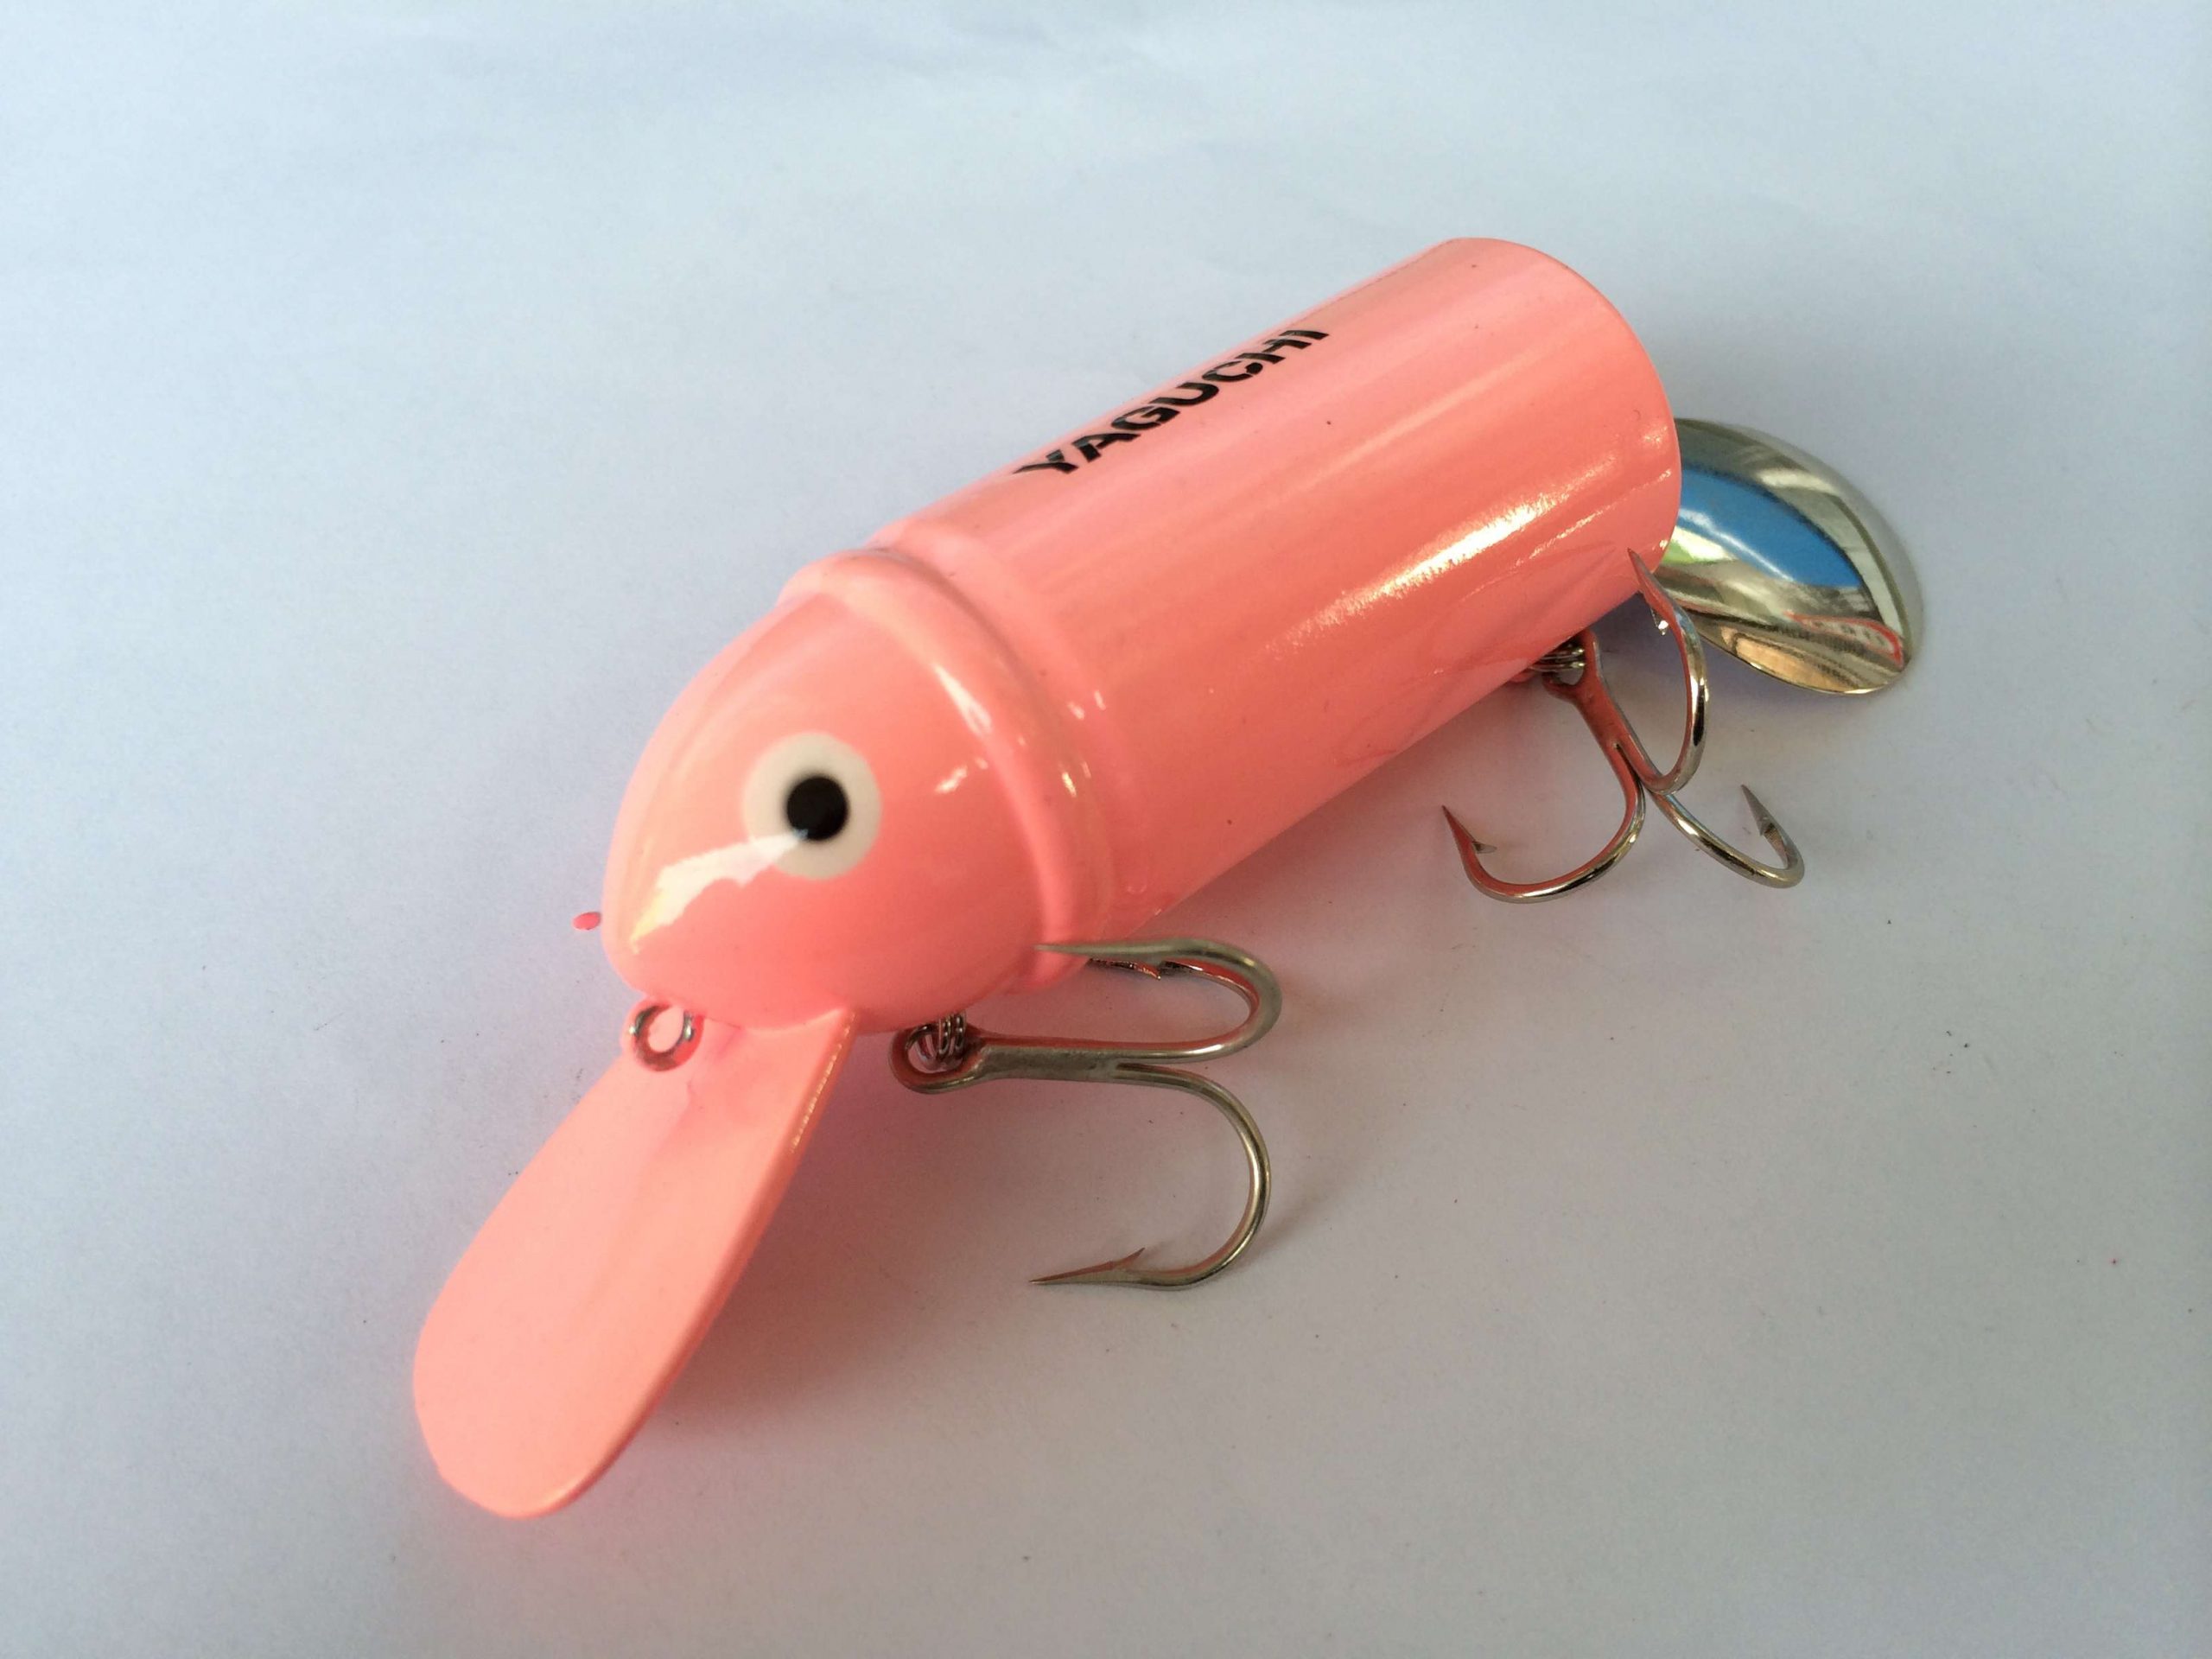 Perhaps for when the pink shad spawn?